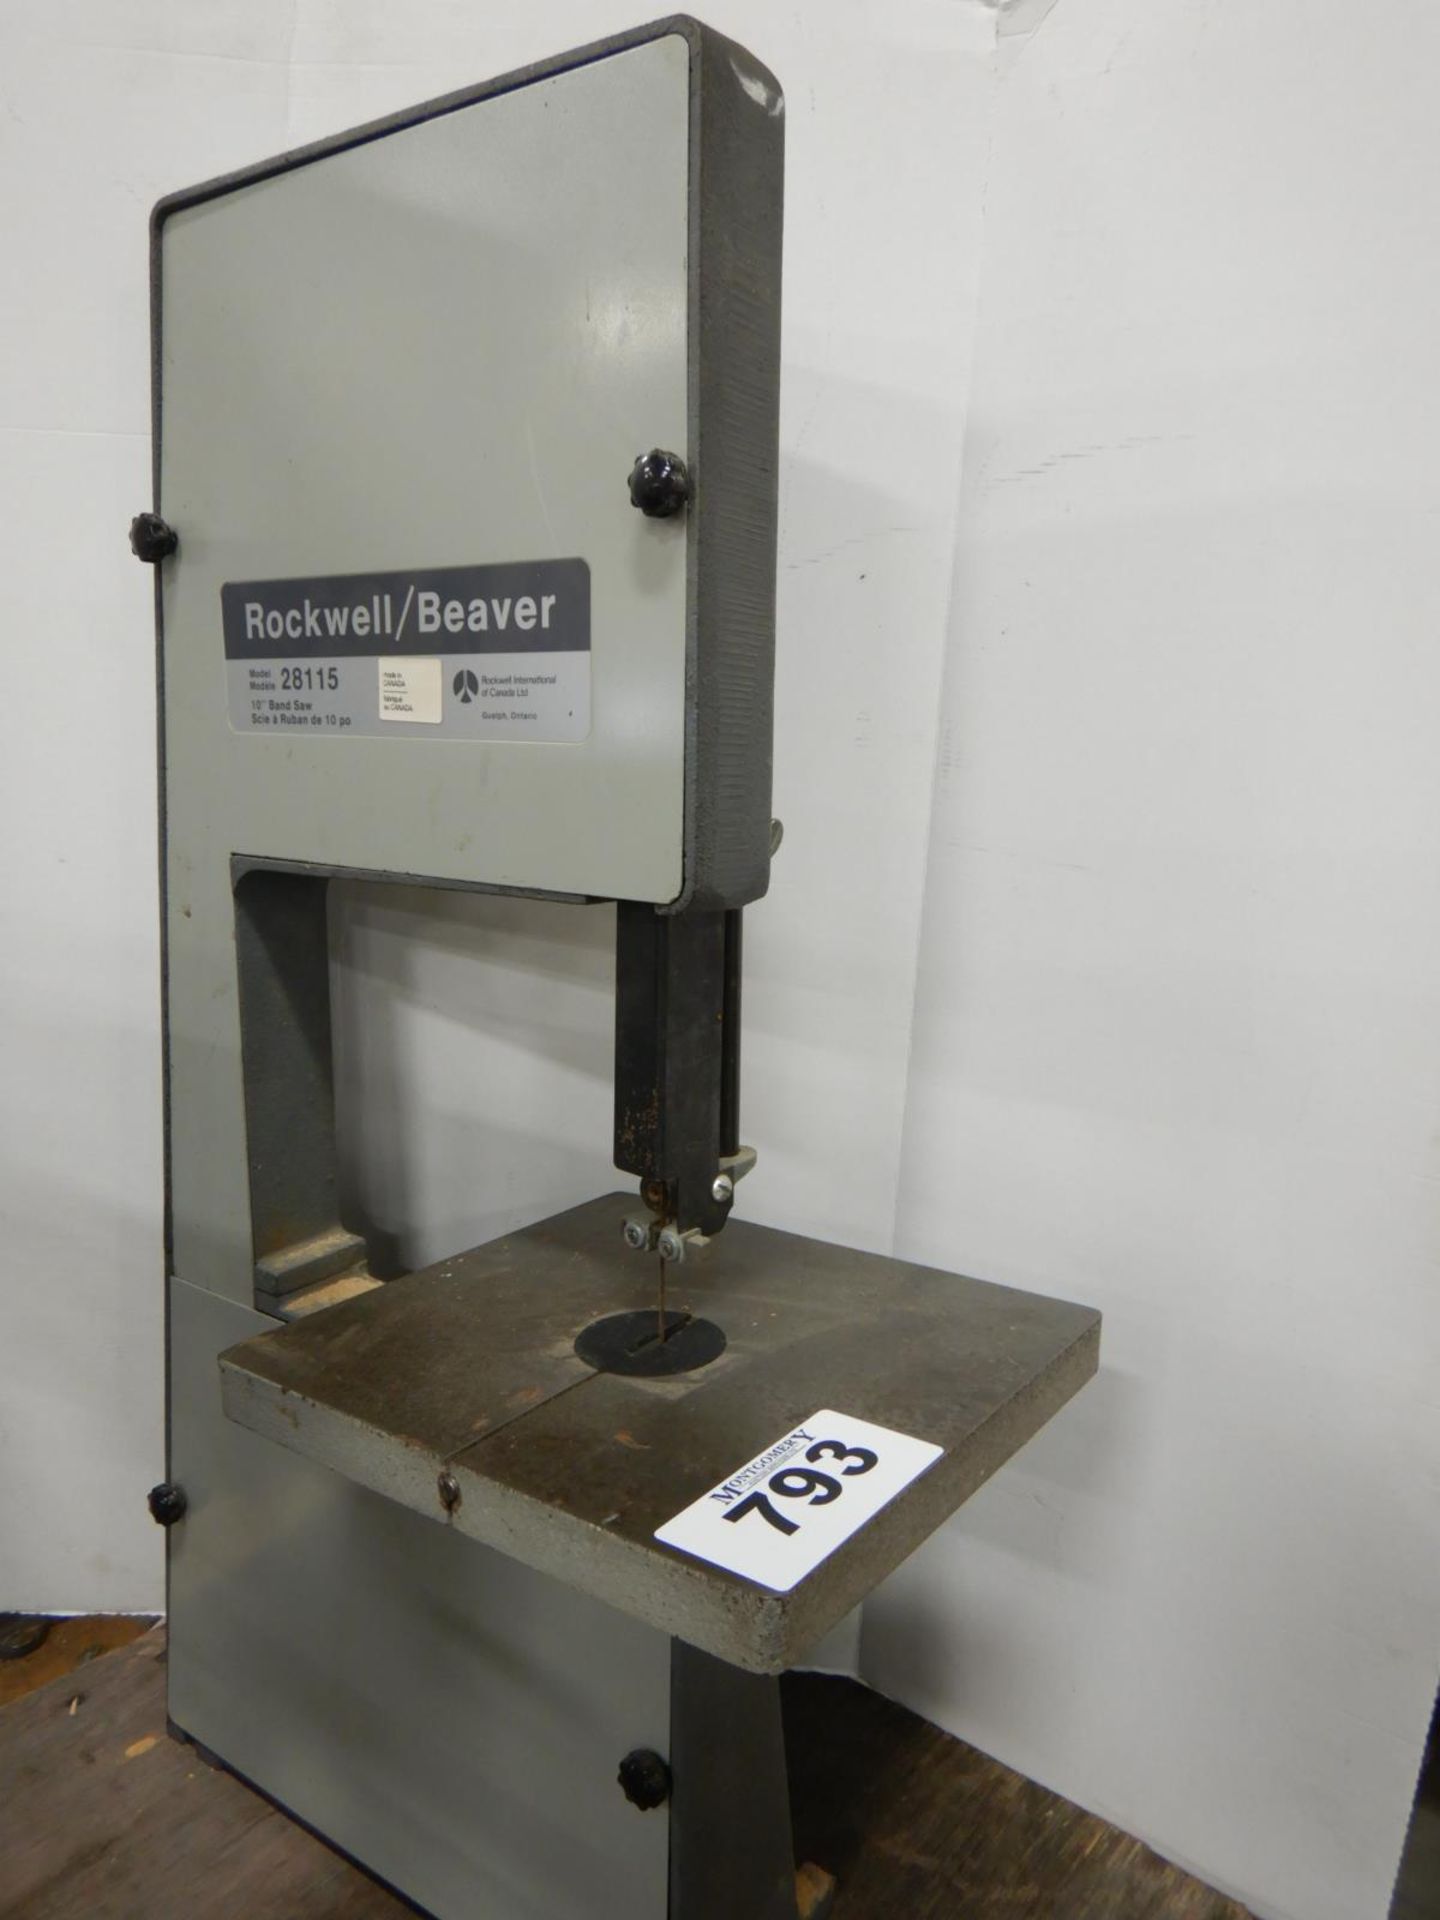 ROCKWELL/BEAVER 28115 10" BENCH TOP BAND SAW